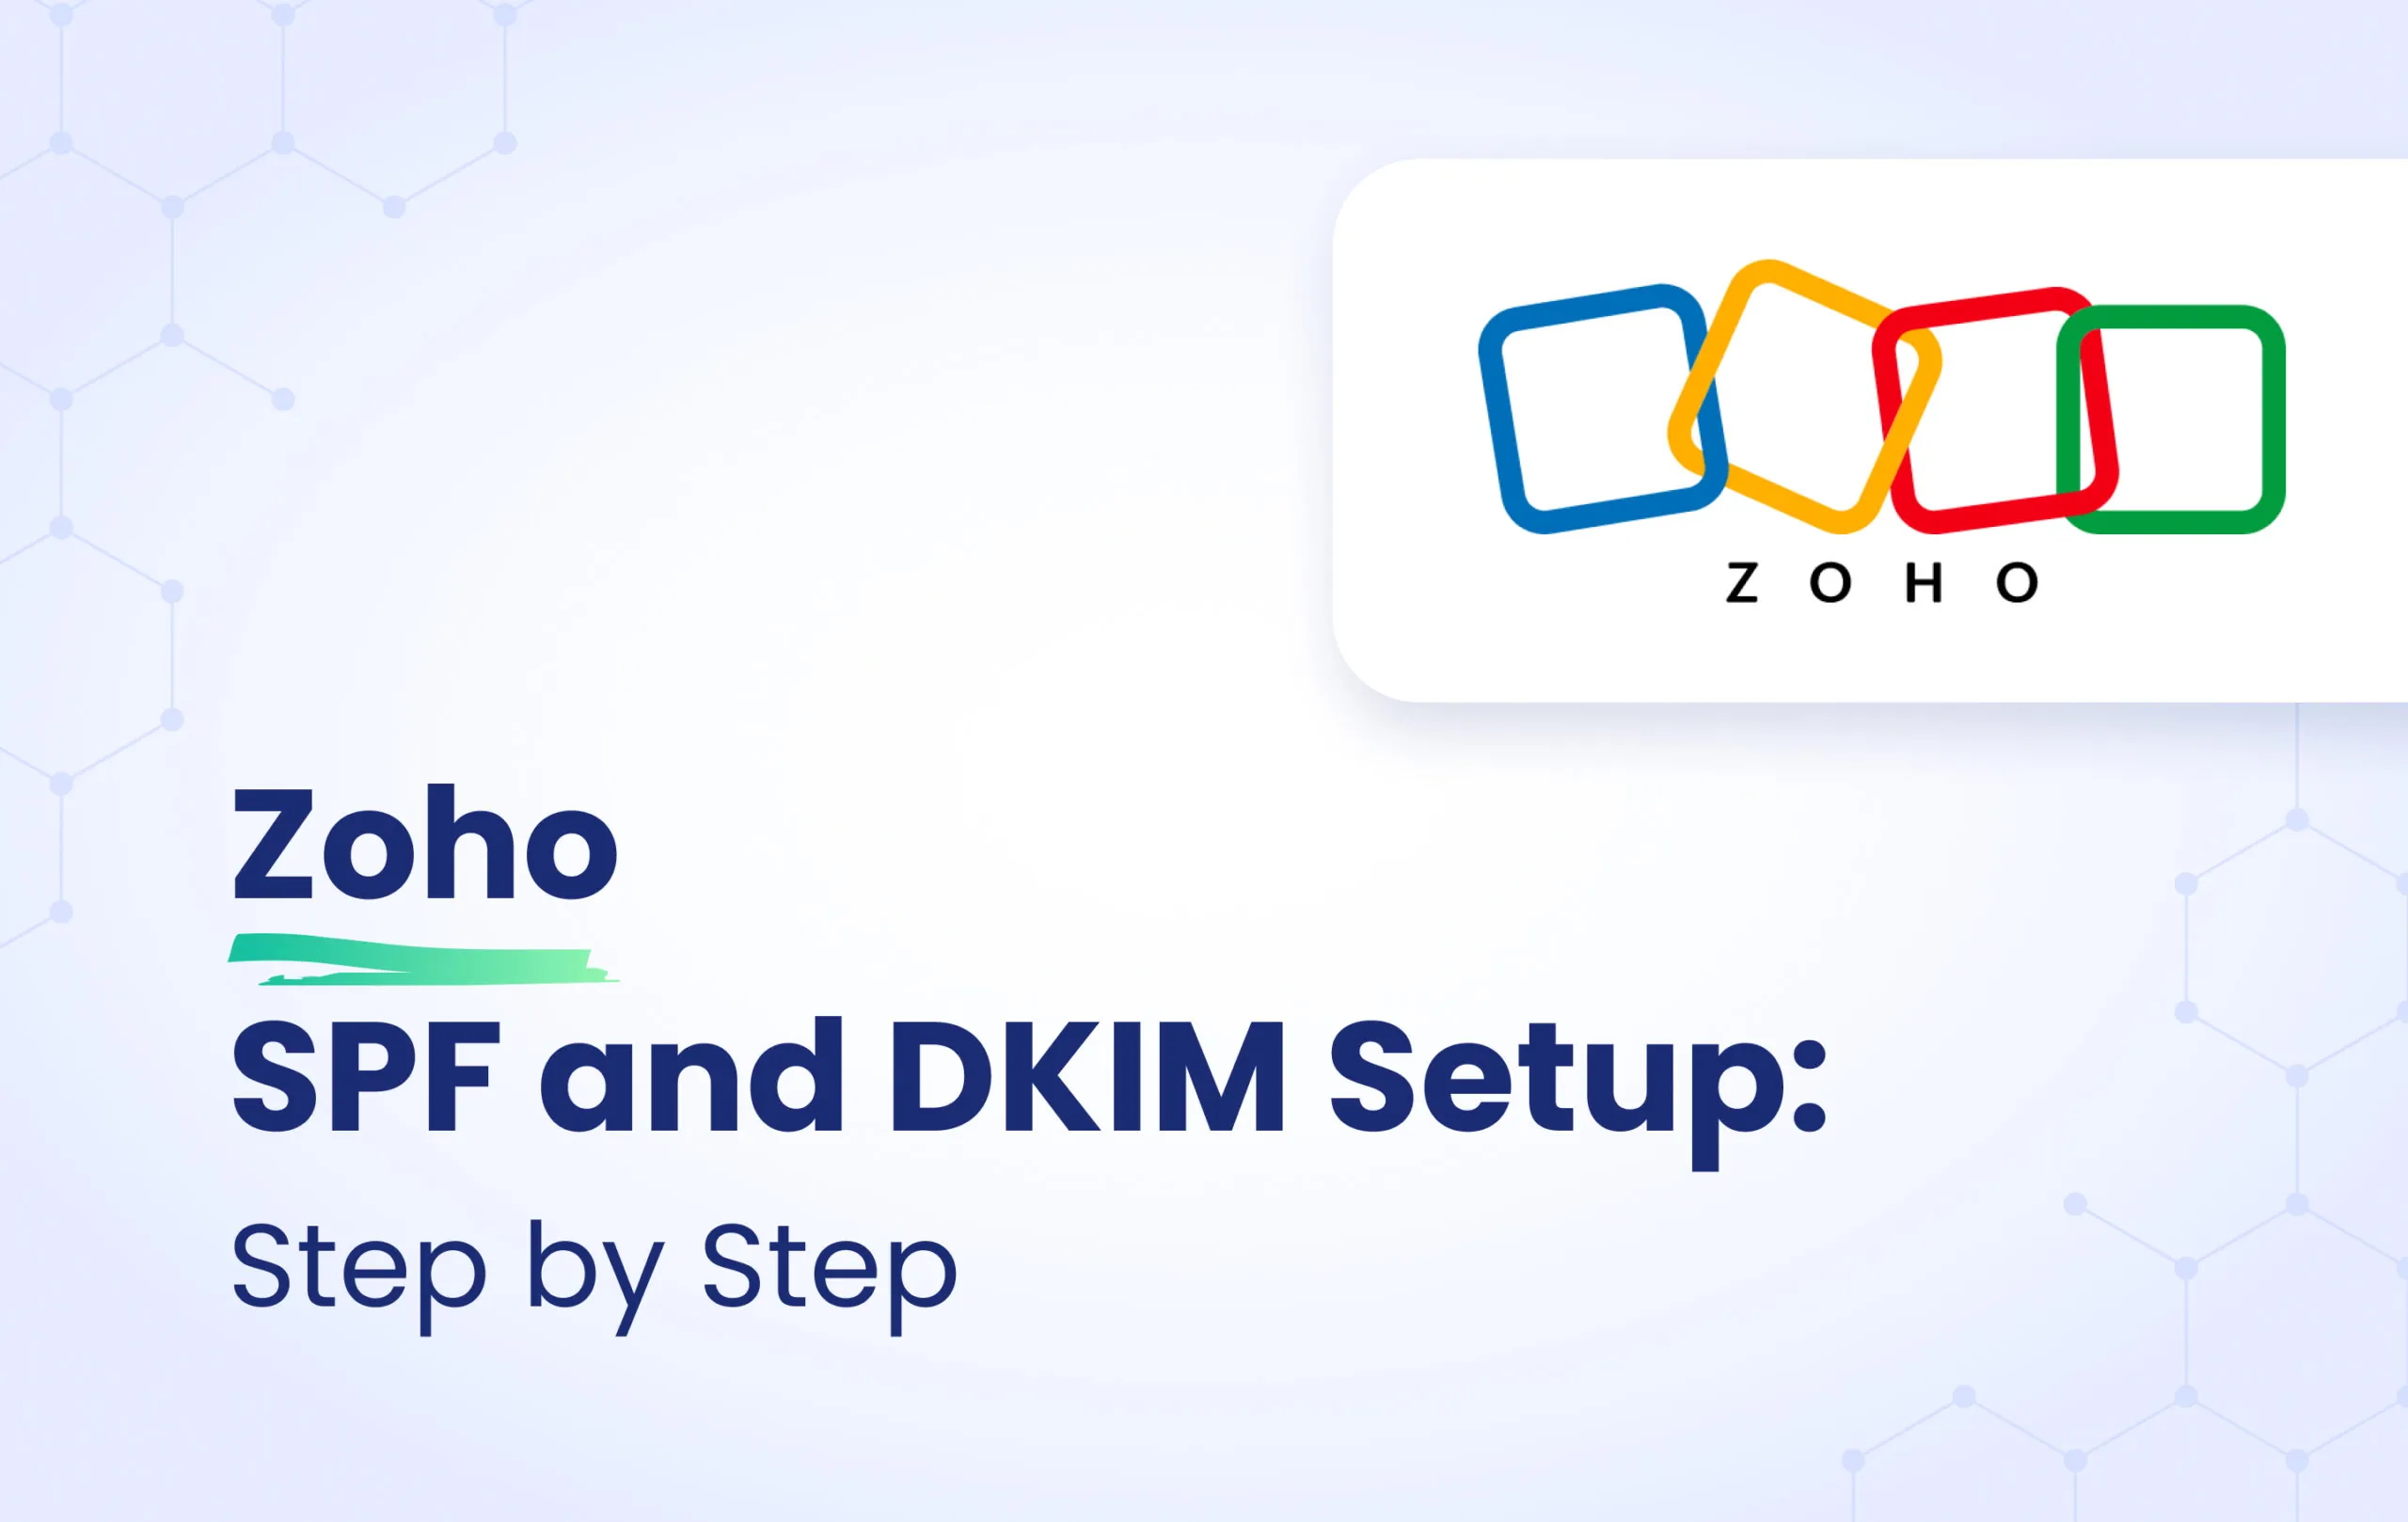 Zoho Mail SPF and DKIM Setup: Step-by-Step featured image